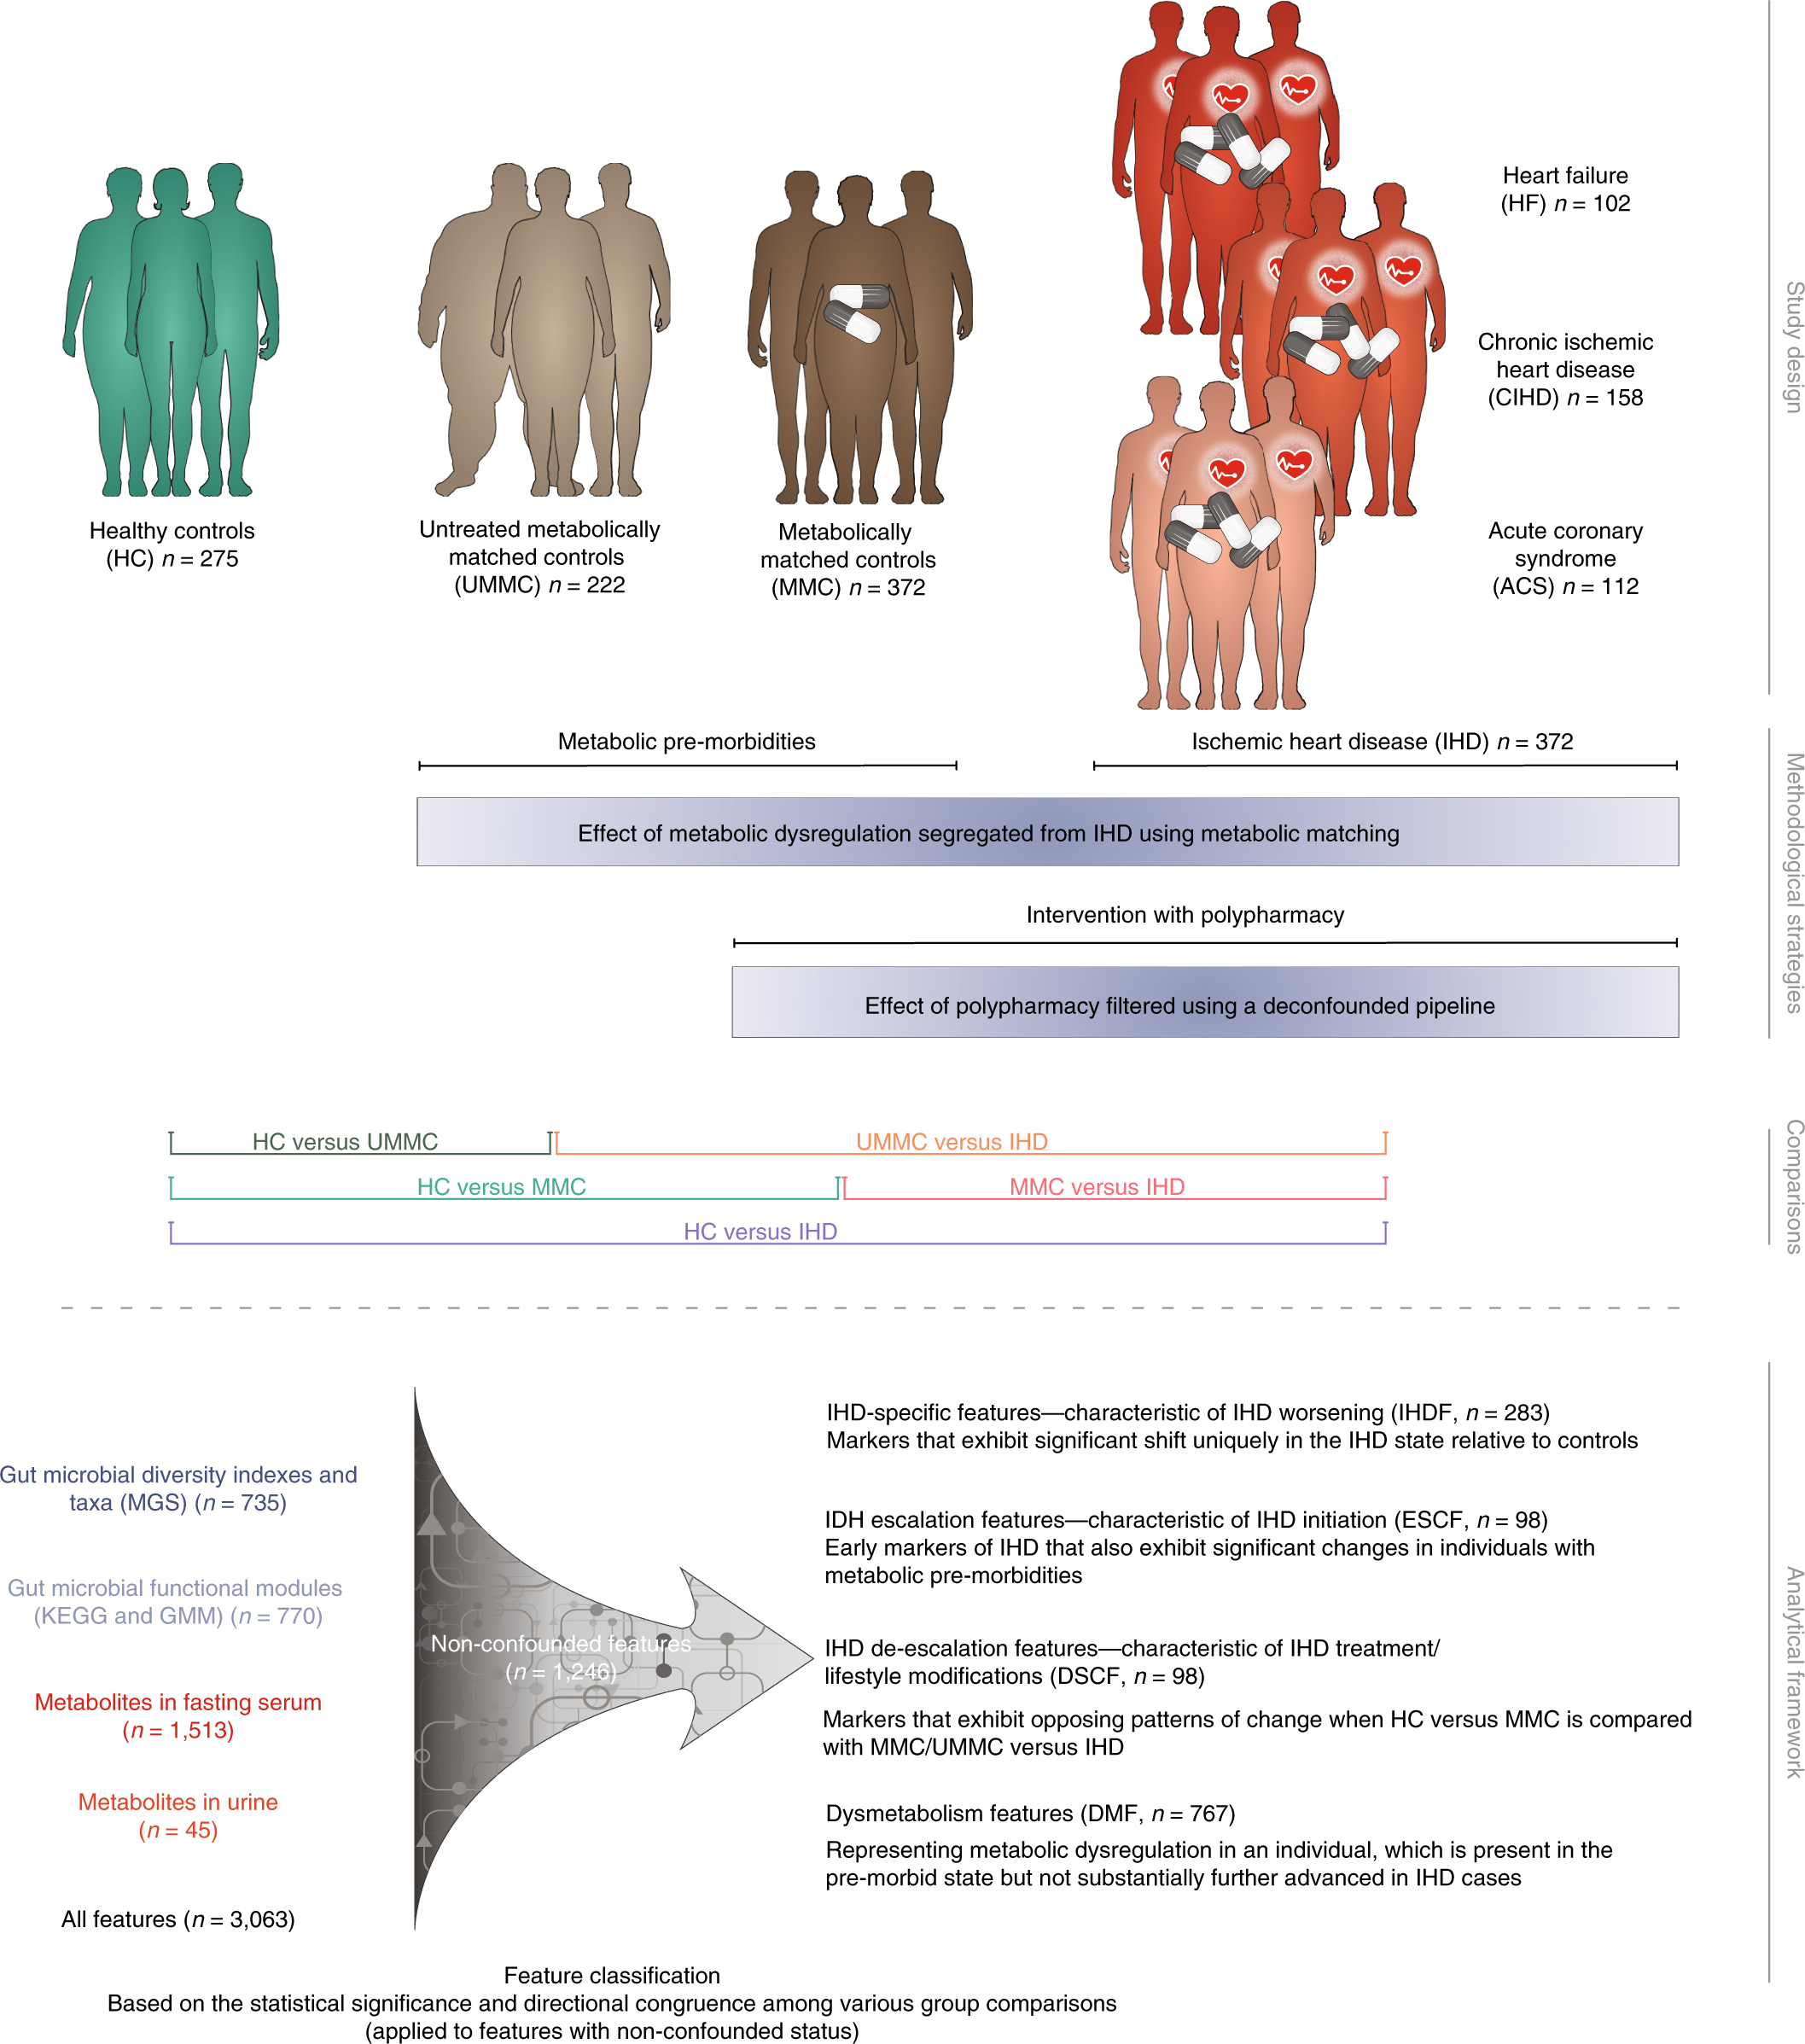 Microbiome and metabolome features of the cardiometabolic disease spectrum  | Nature Medicine